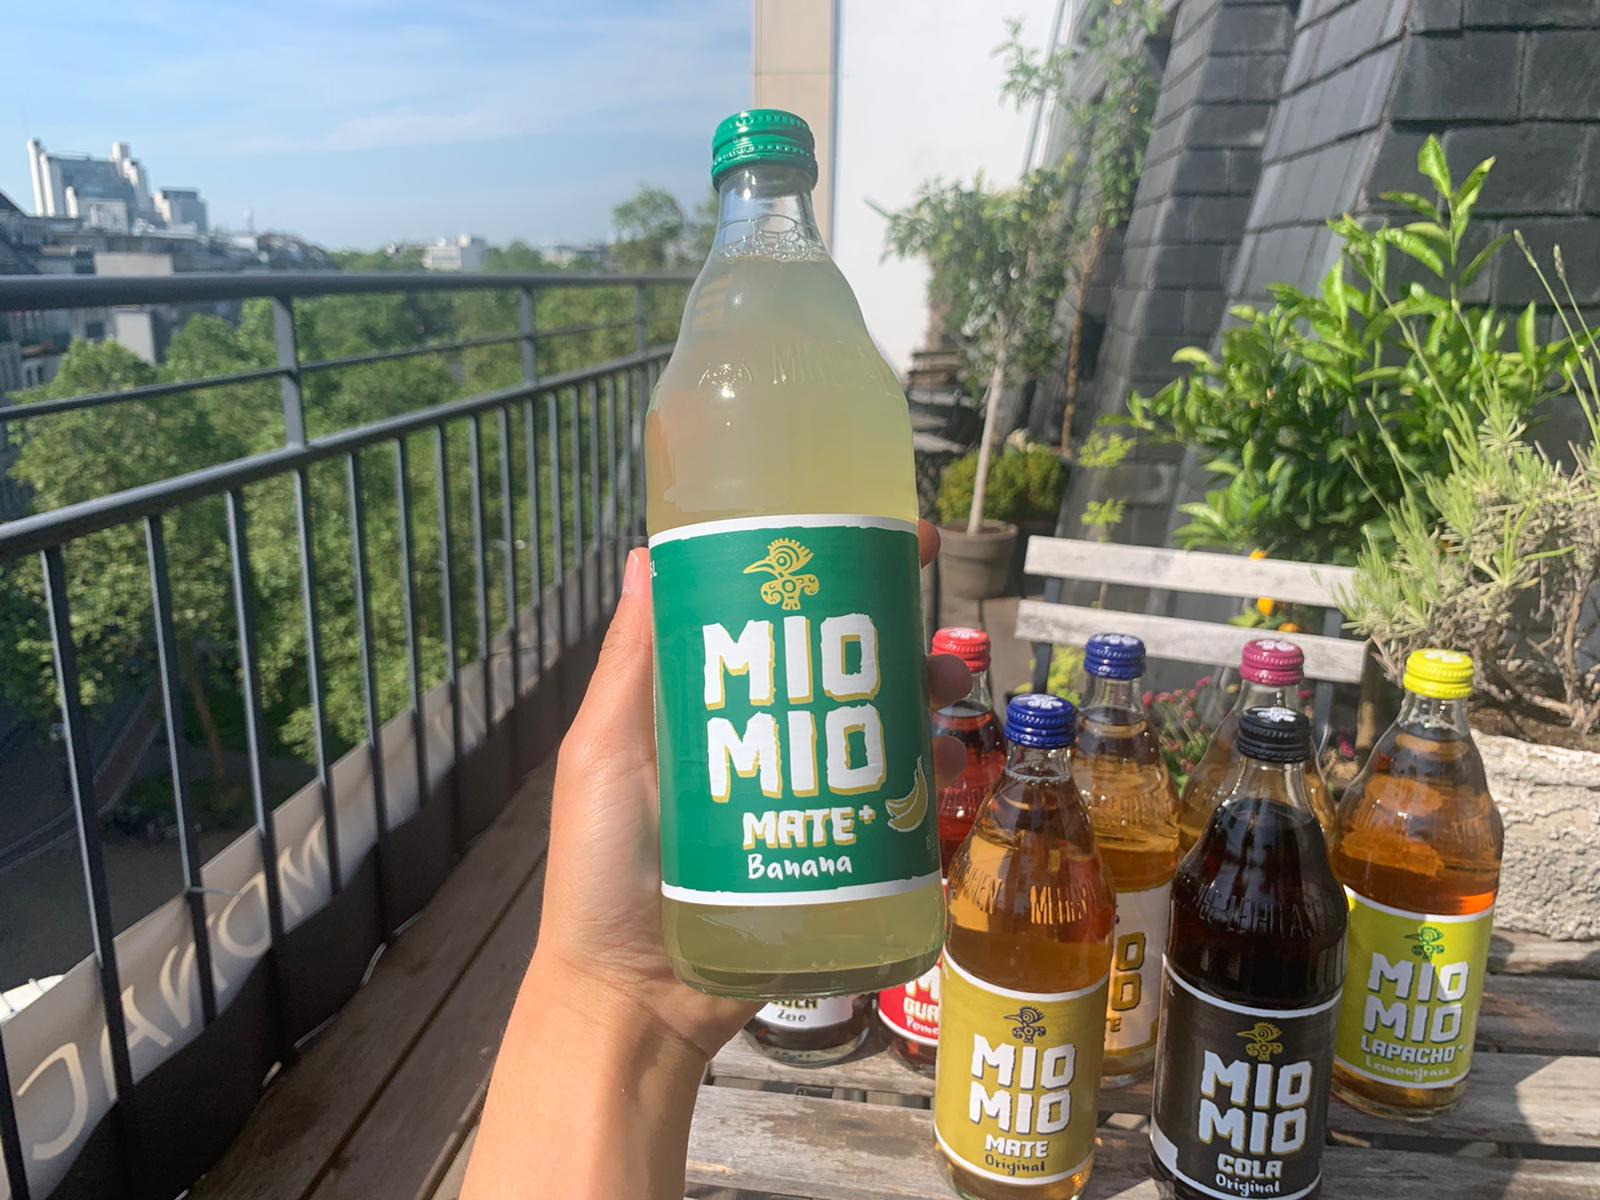 Mio Mio Mate: 8 drinks for the summer - Our test winner! - FIV